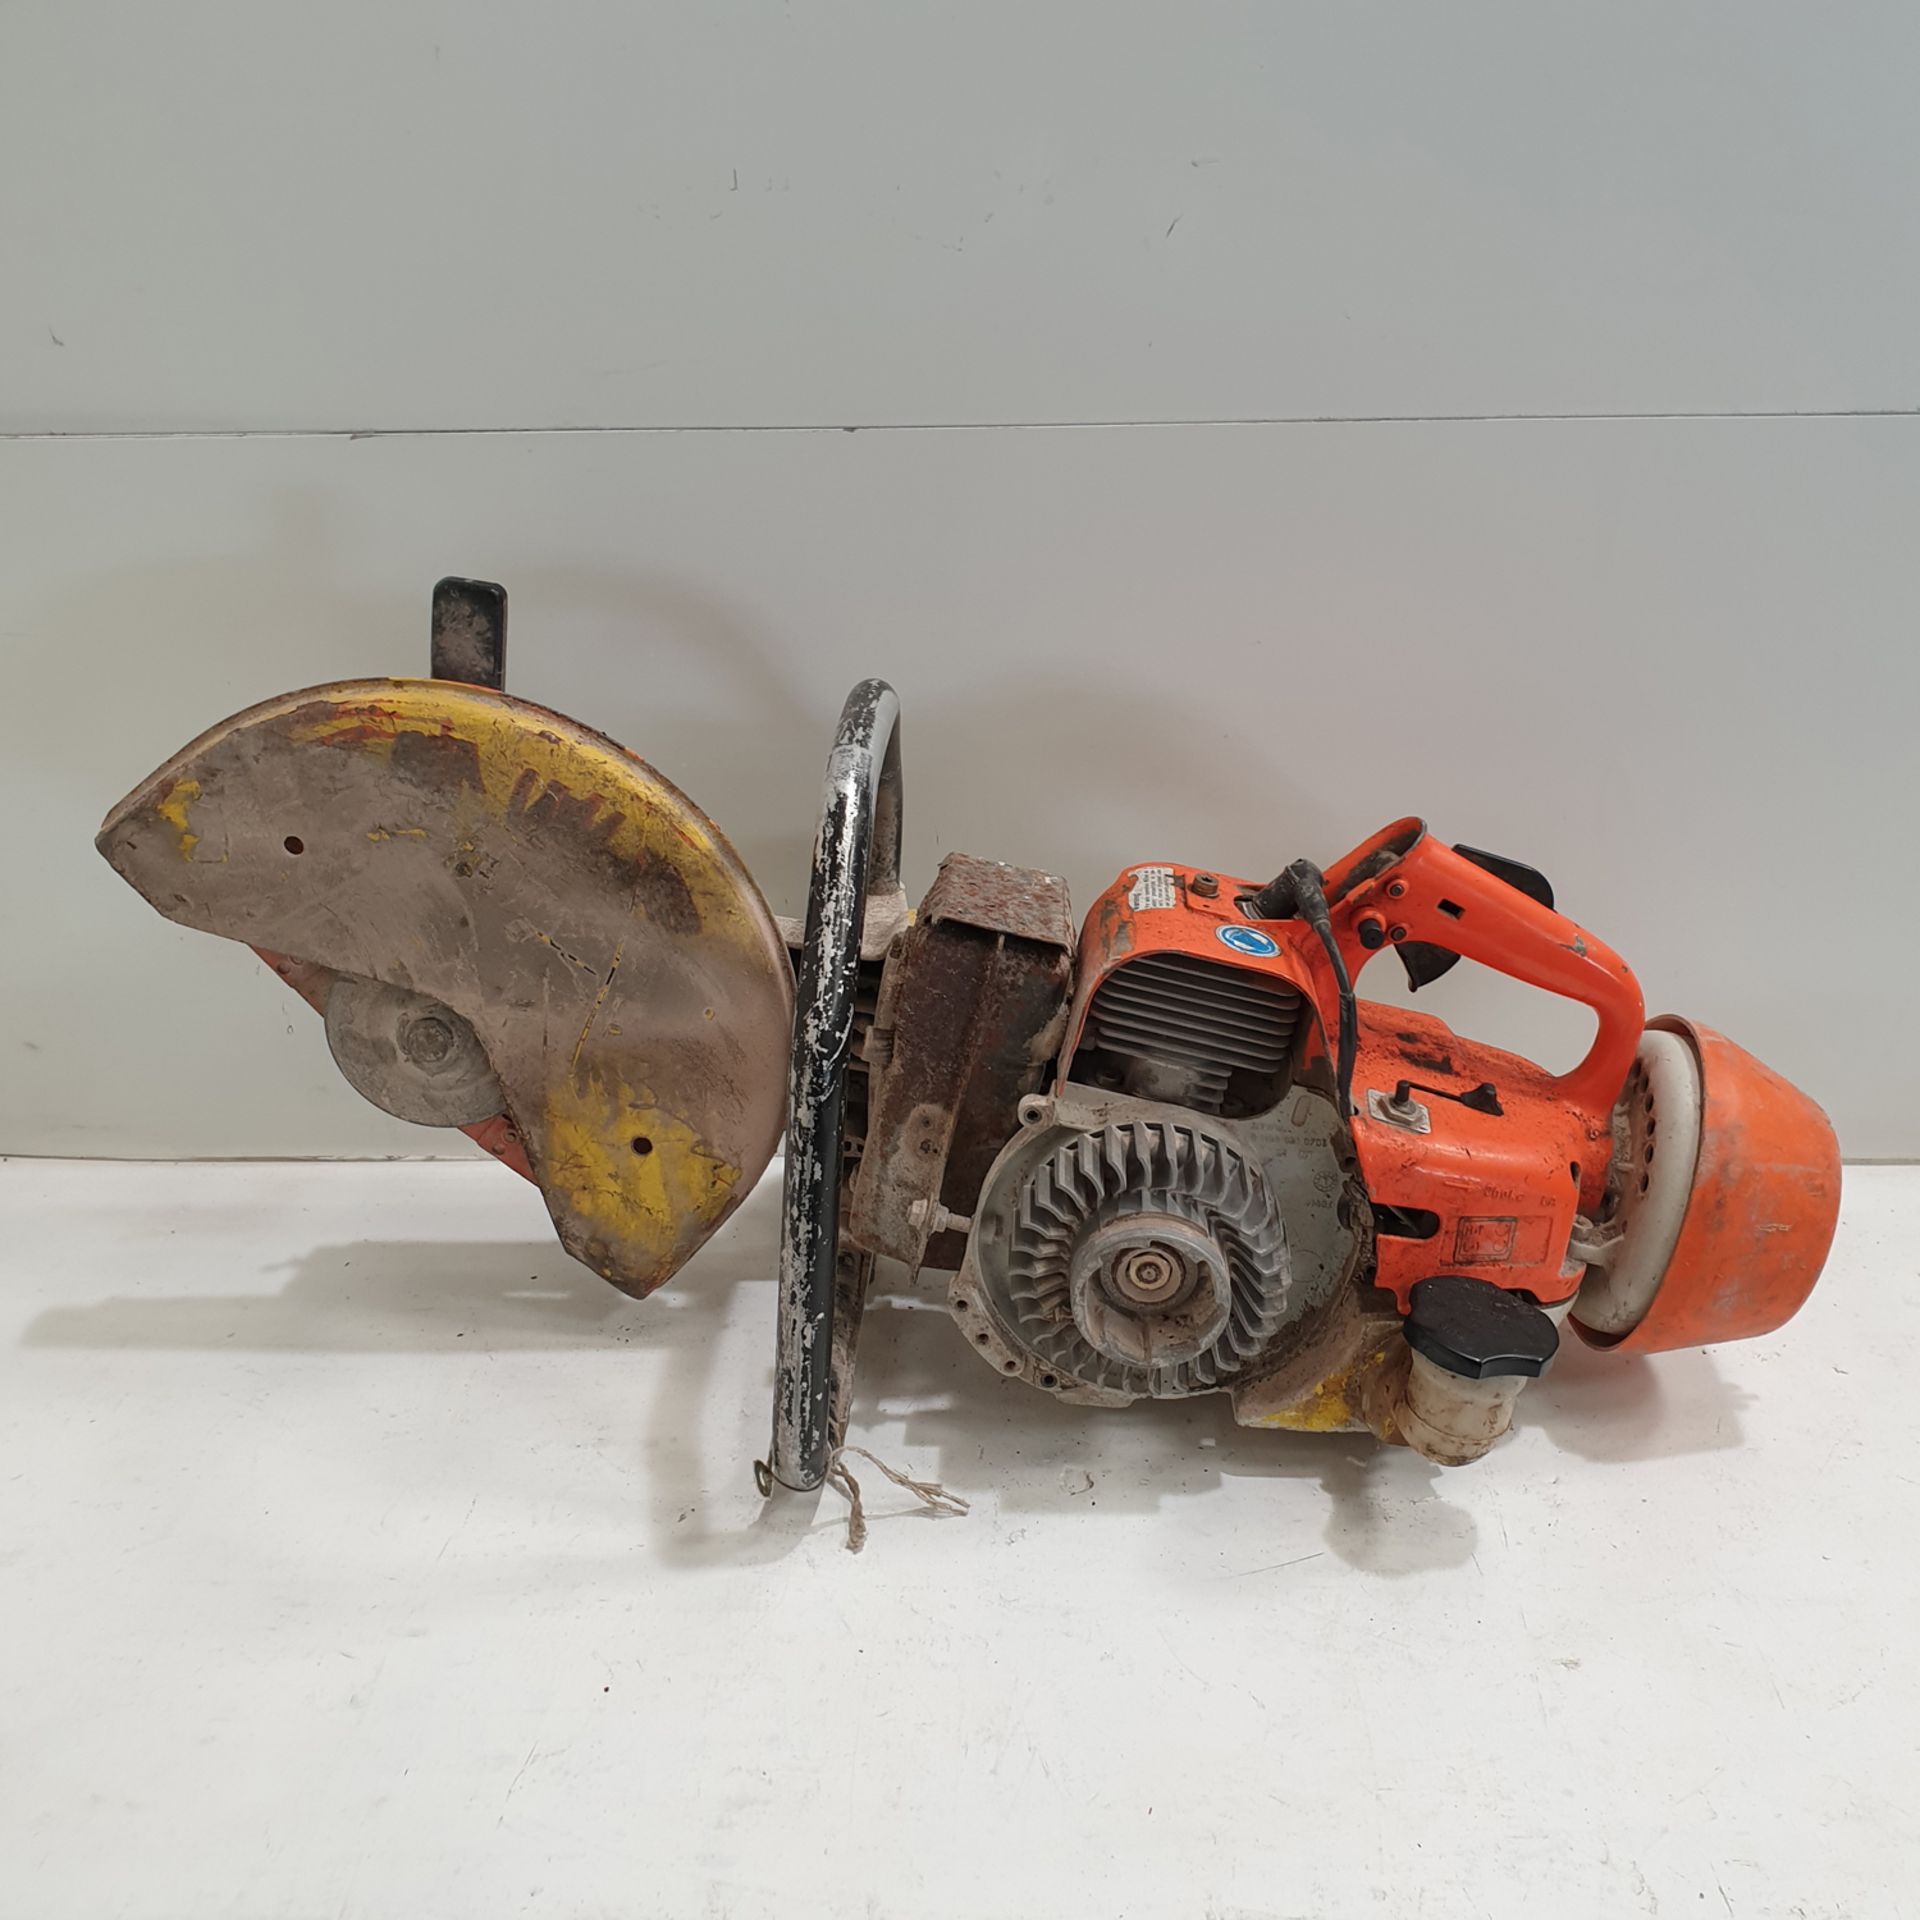 STIHL Saw Type TS 350 SUPER. Please Note This Item is for Spares or Repairs.